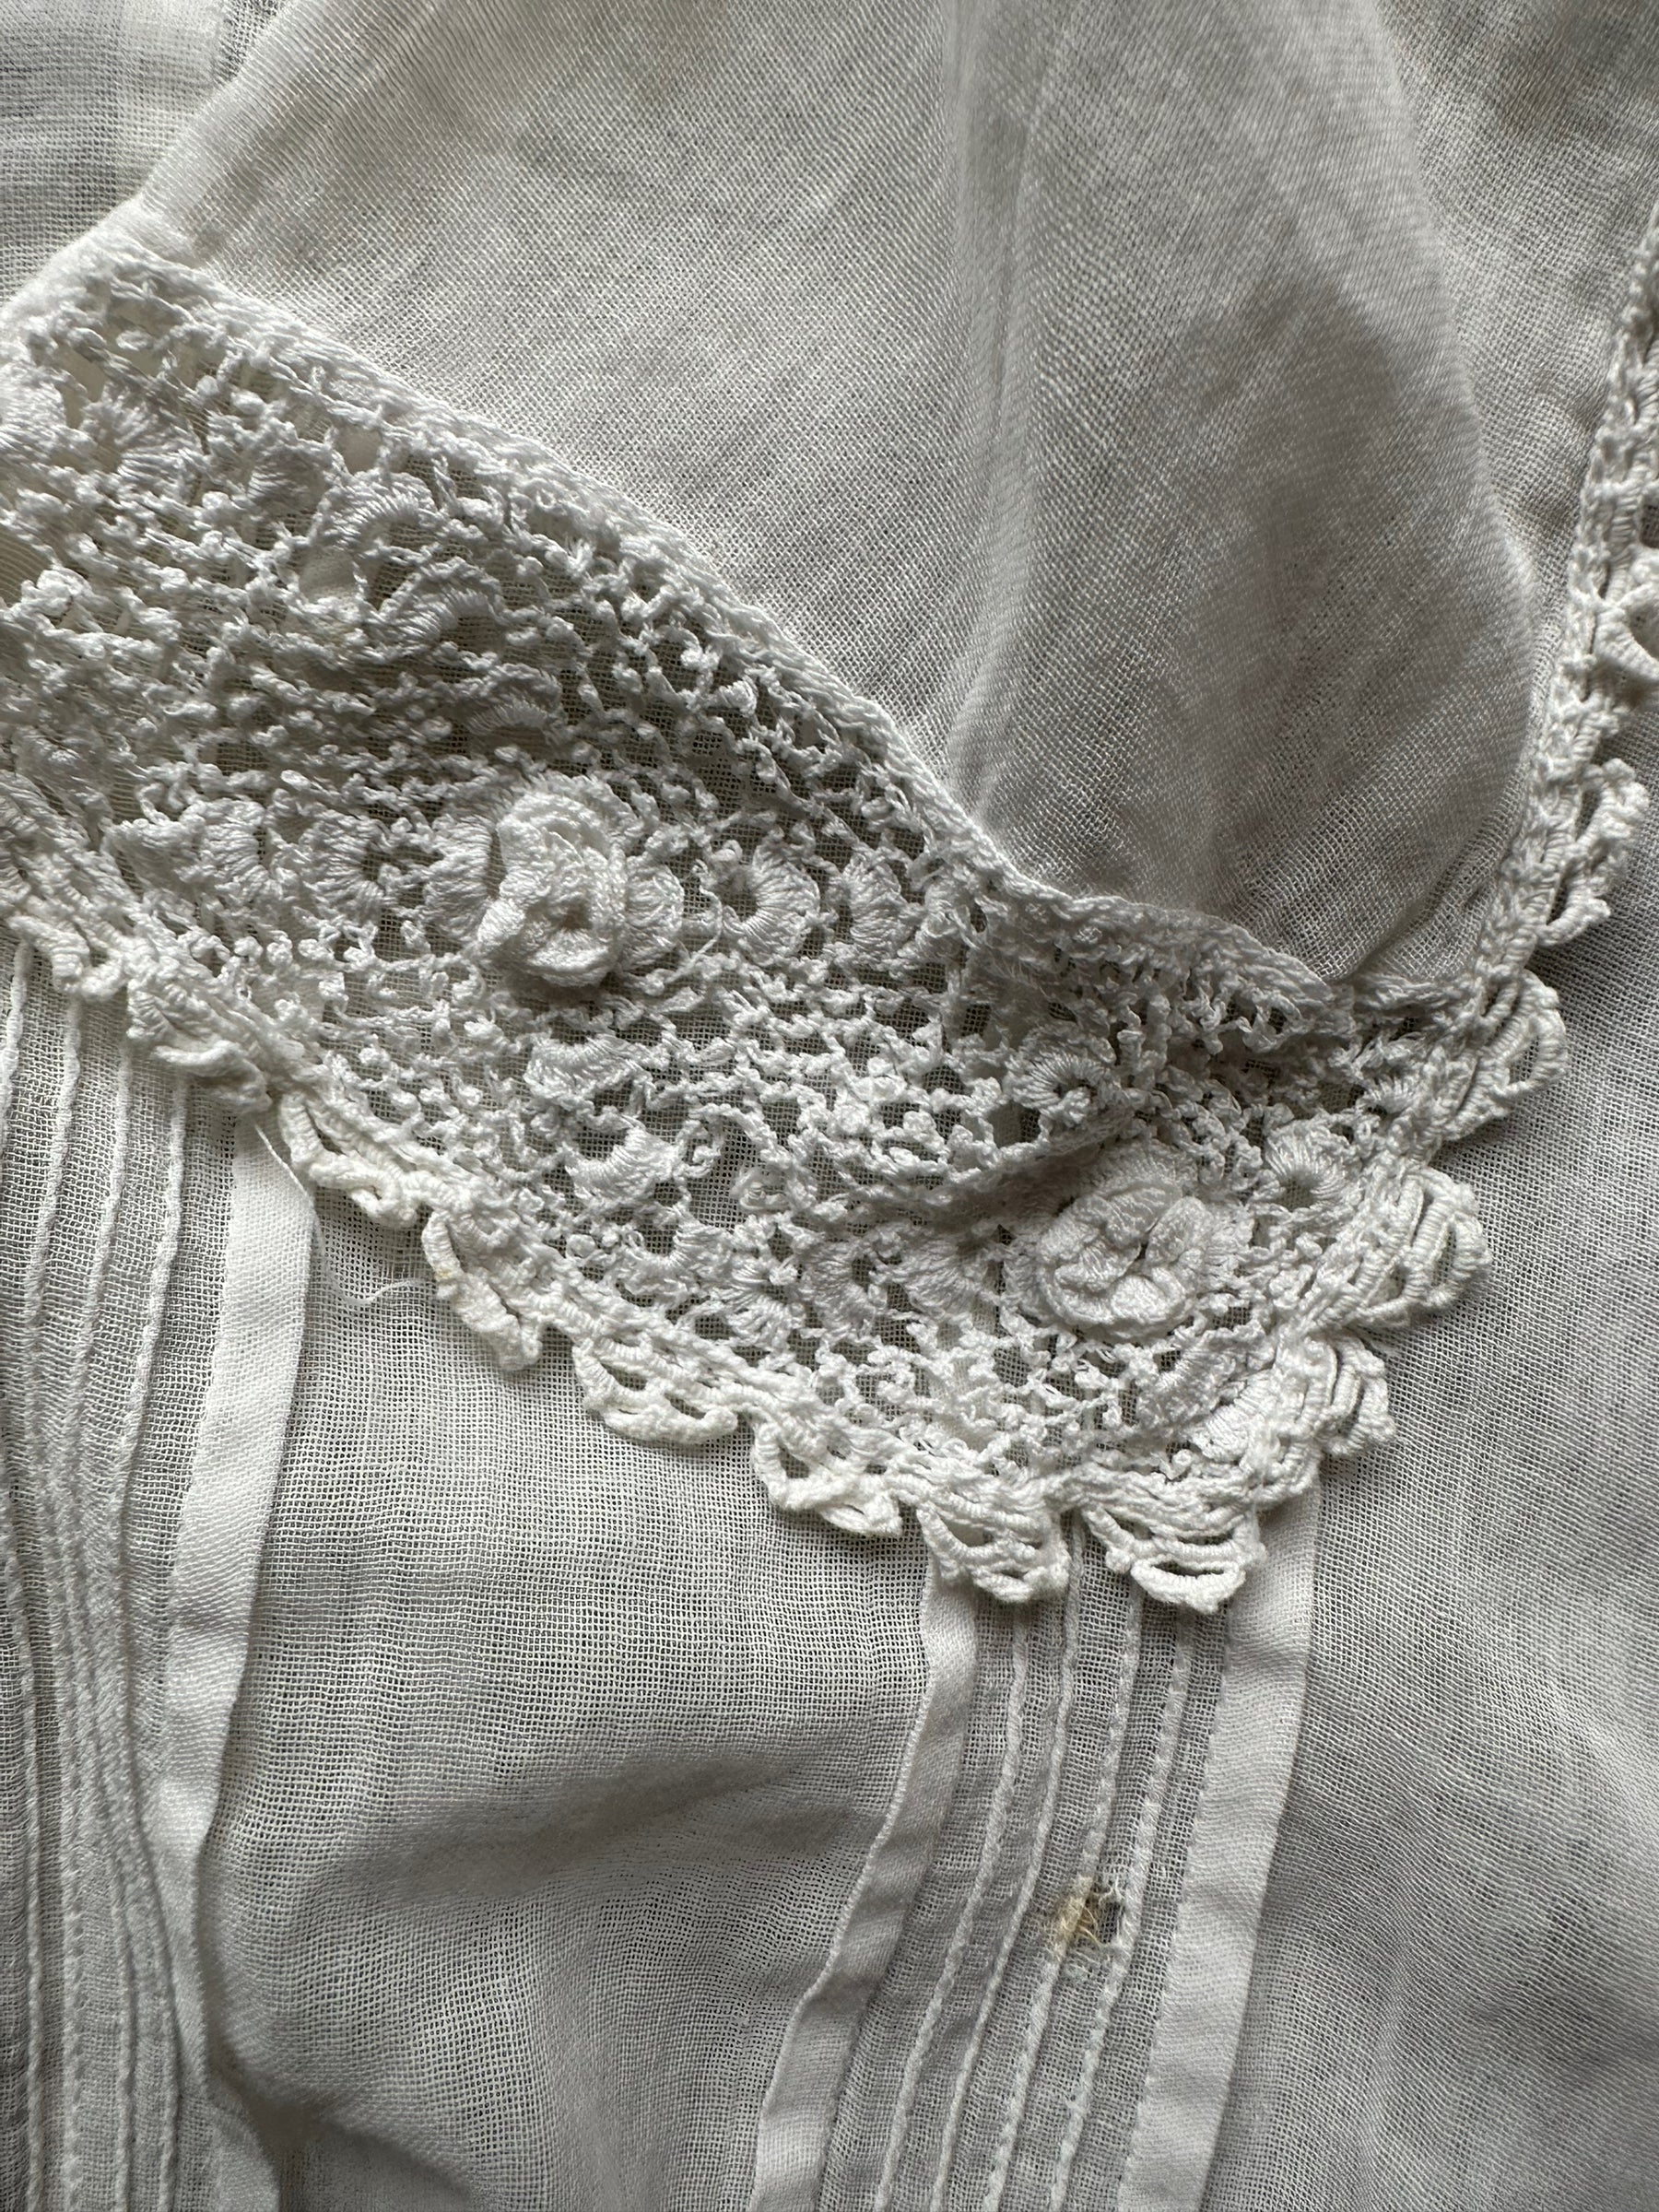 Left collar lace Early 1900's Edwardian Blouse | Seattle True Vintage | Barn Owl Ladies Clothing